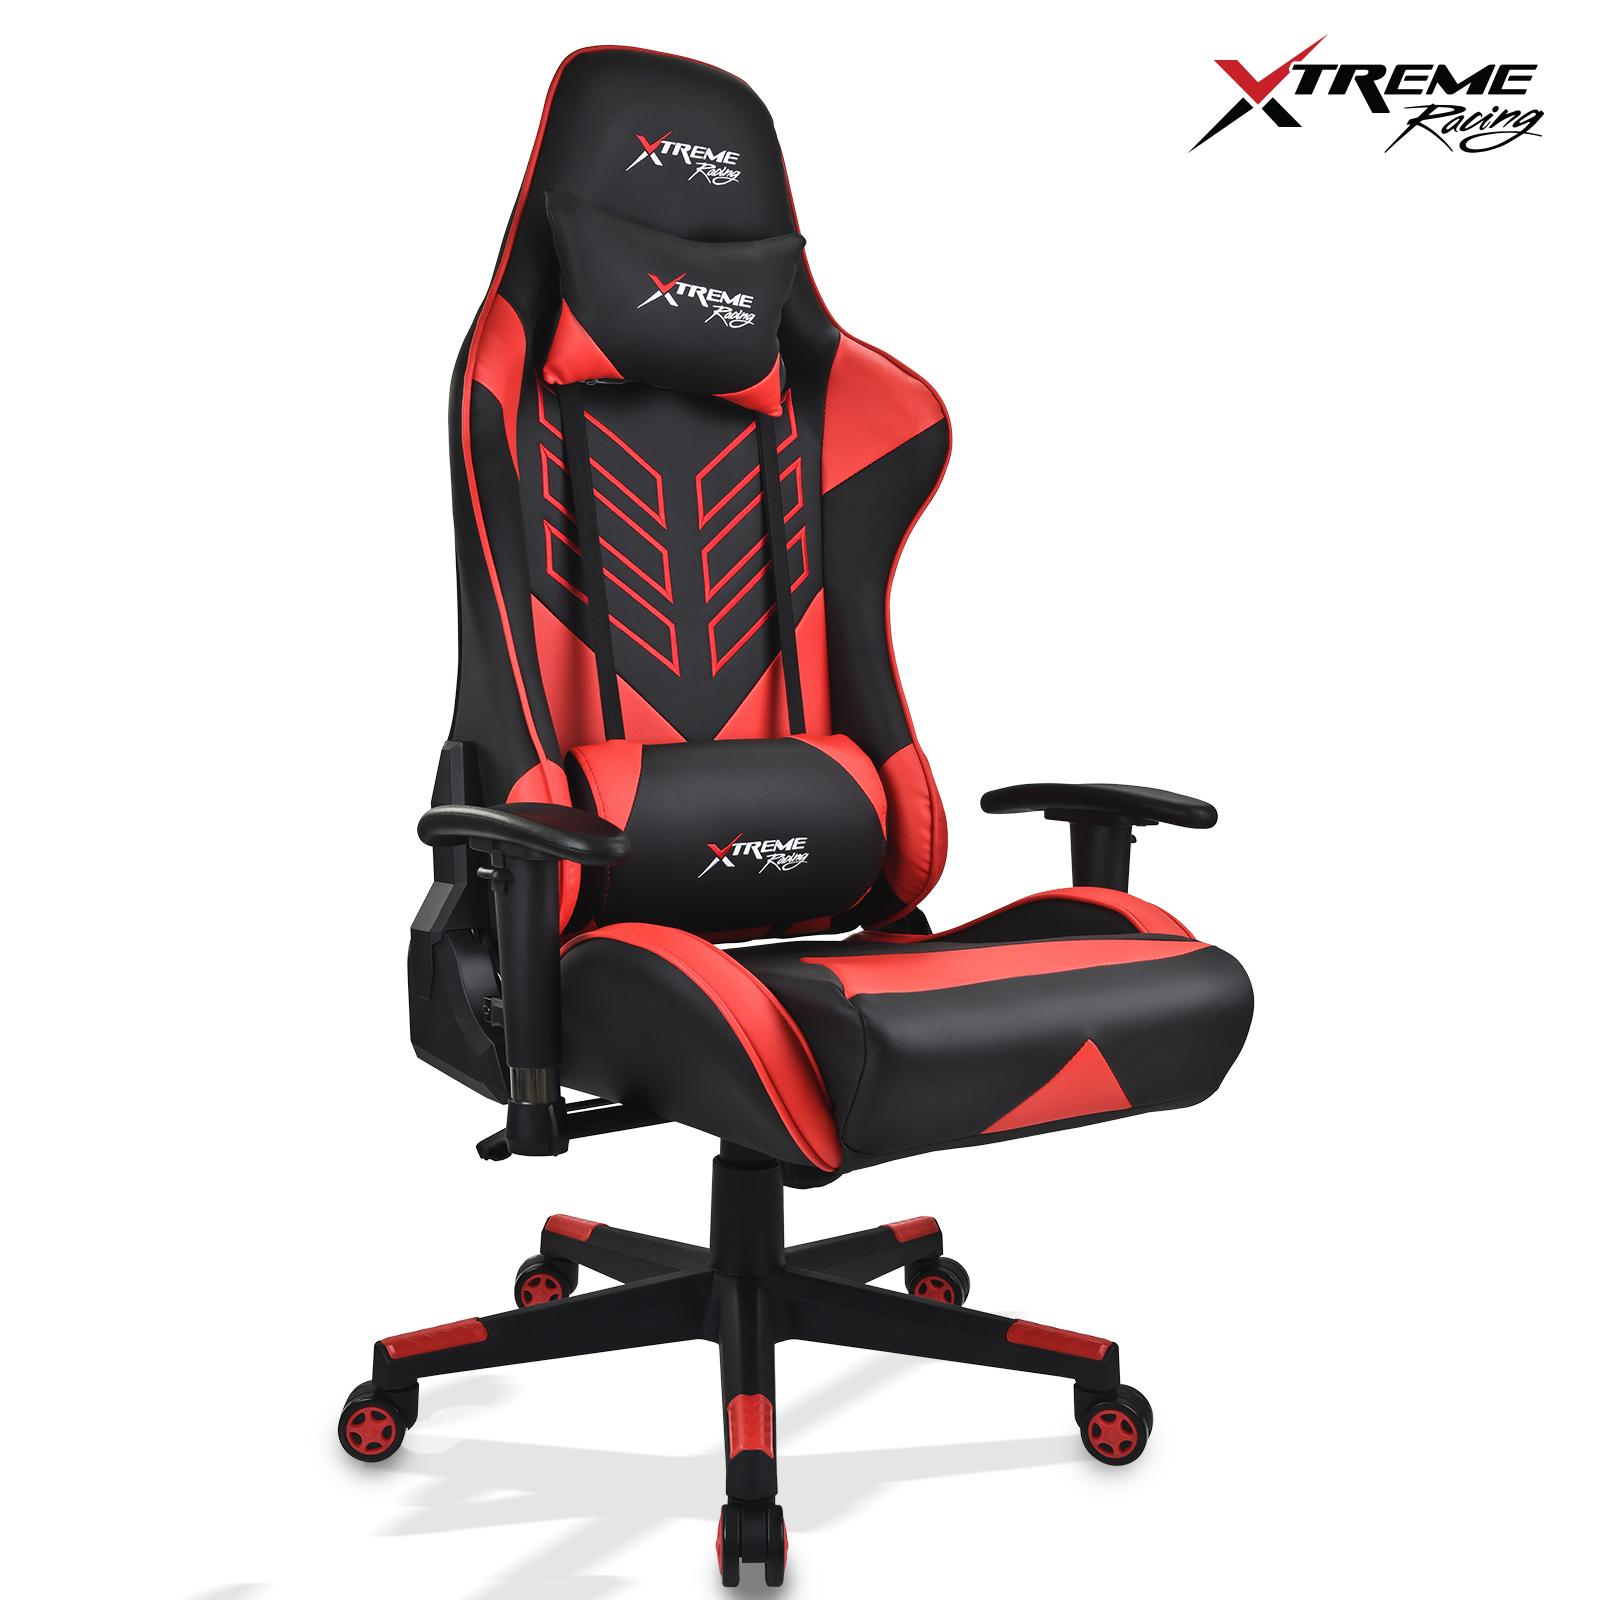 Xtreme Racing Red High Back Gaming Chair For Sale